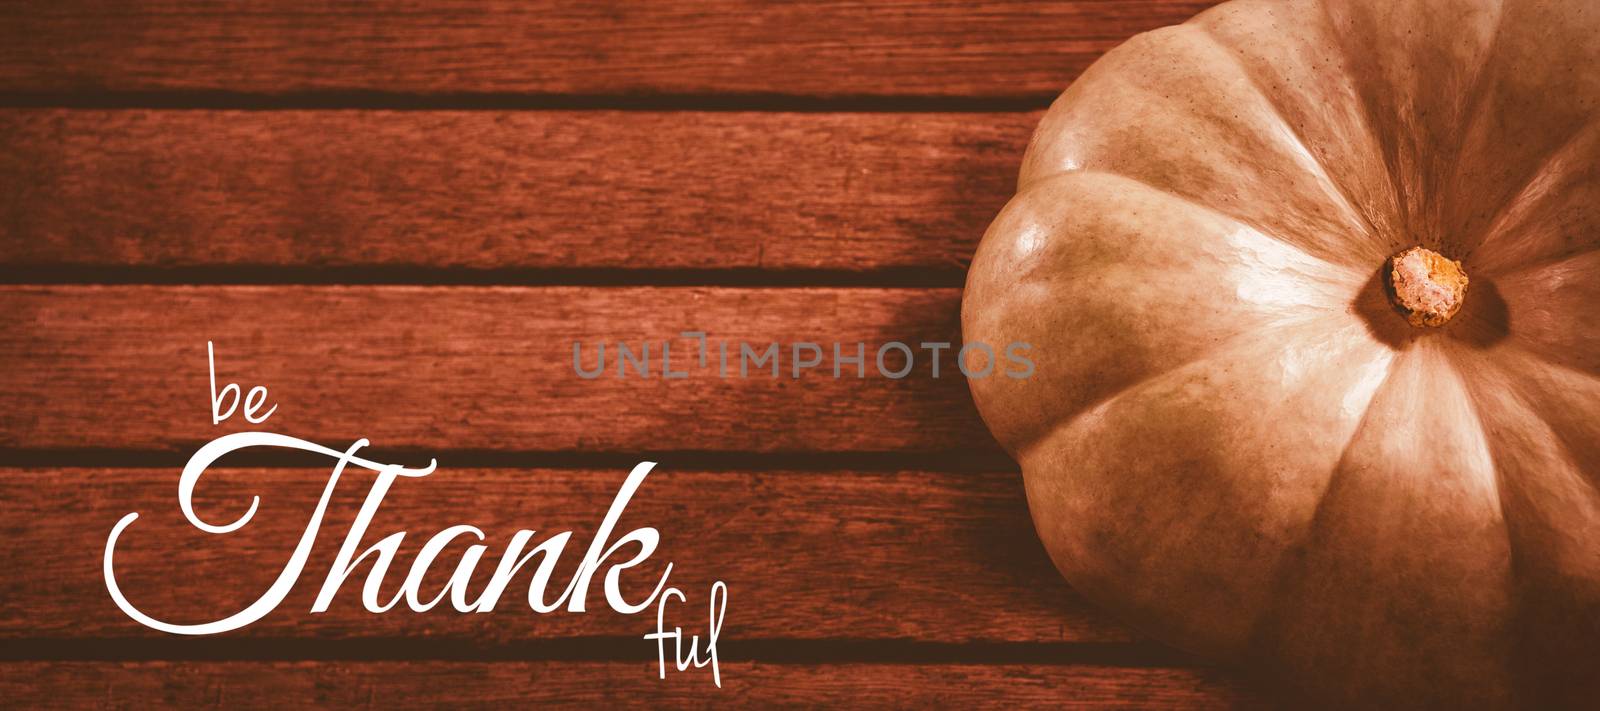 Composite image of digital image of happy thanksgiving day text greeting by Wavebreakmedia